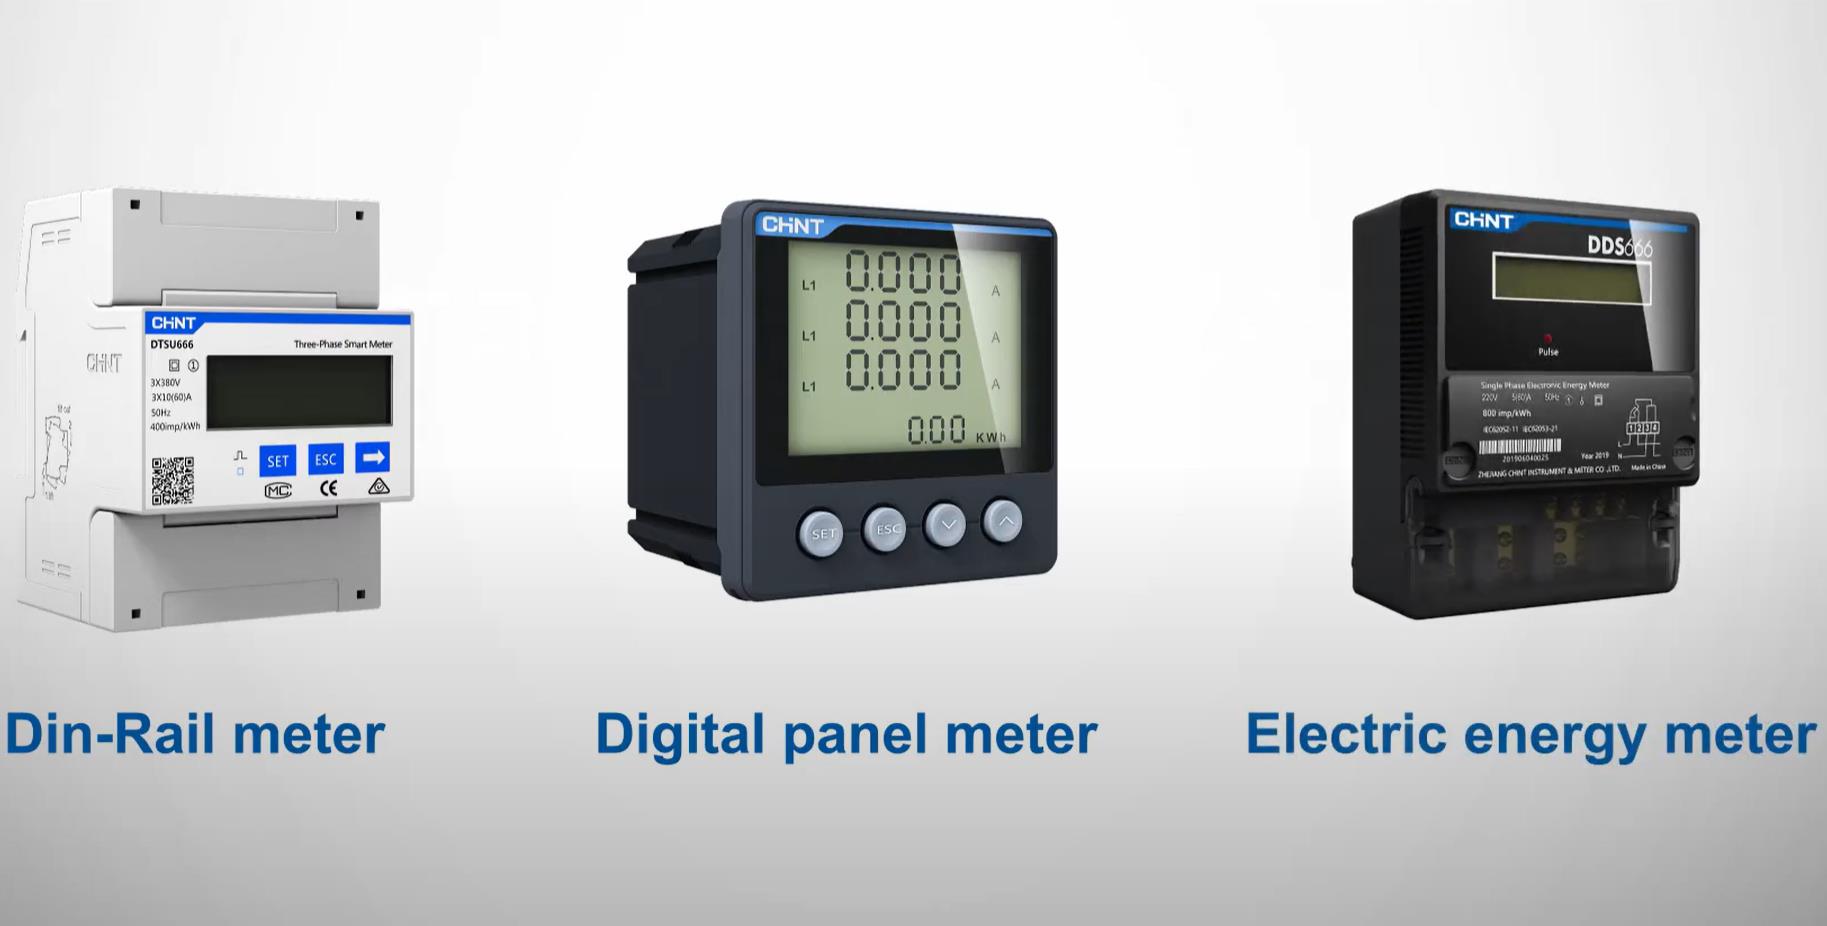 CHINT NEXT Series - Energy Meter and Panel Meter